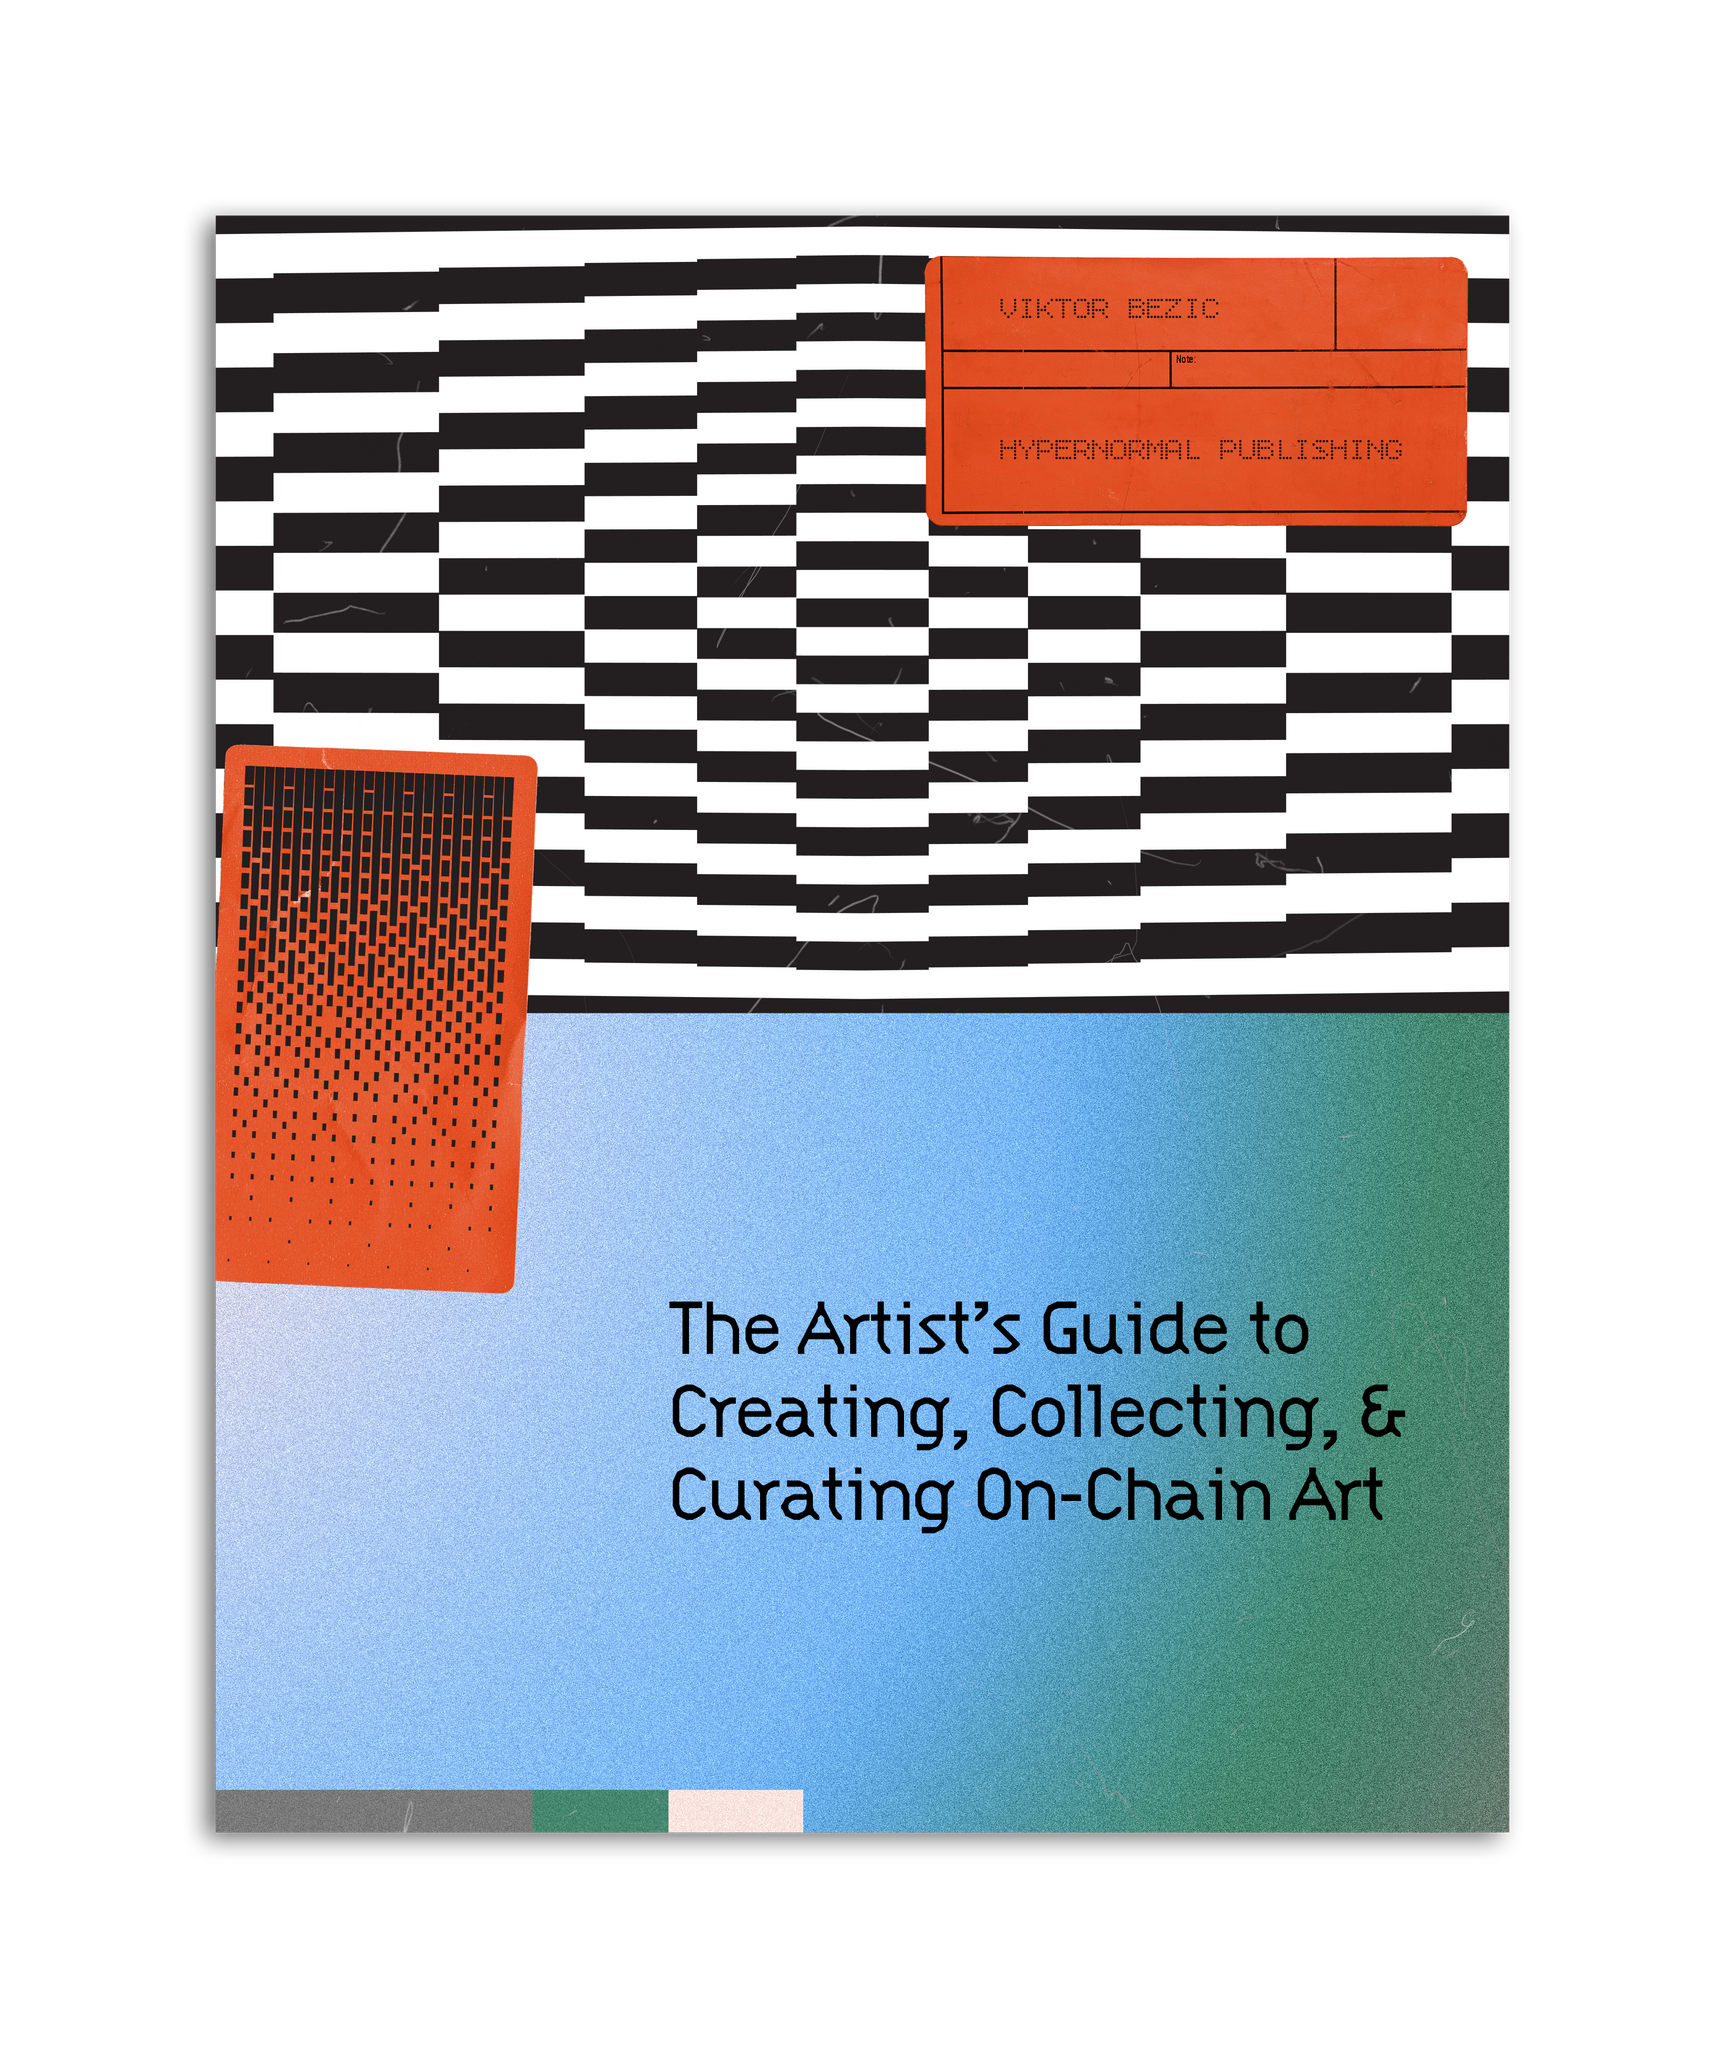 The Artist's Guide to Creating, Collecting & Curating On-Chain Art